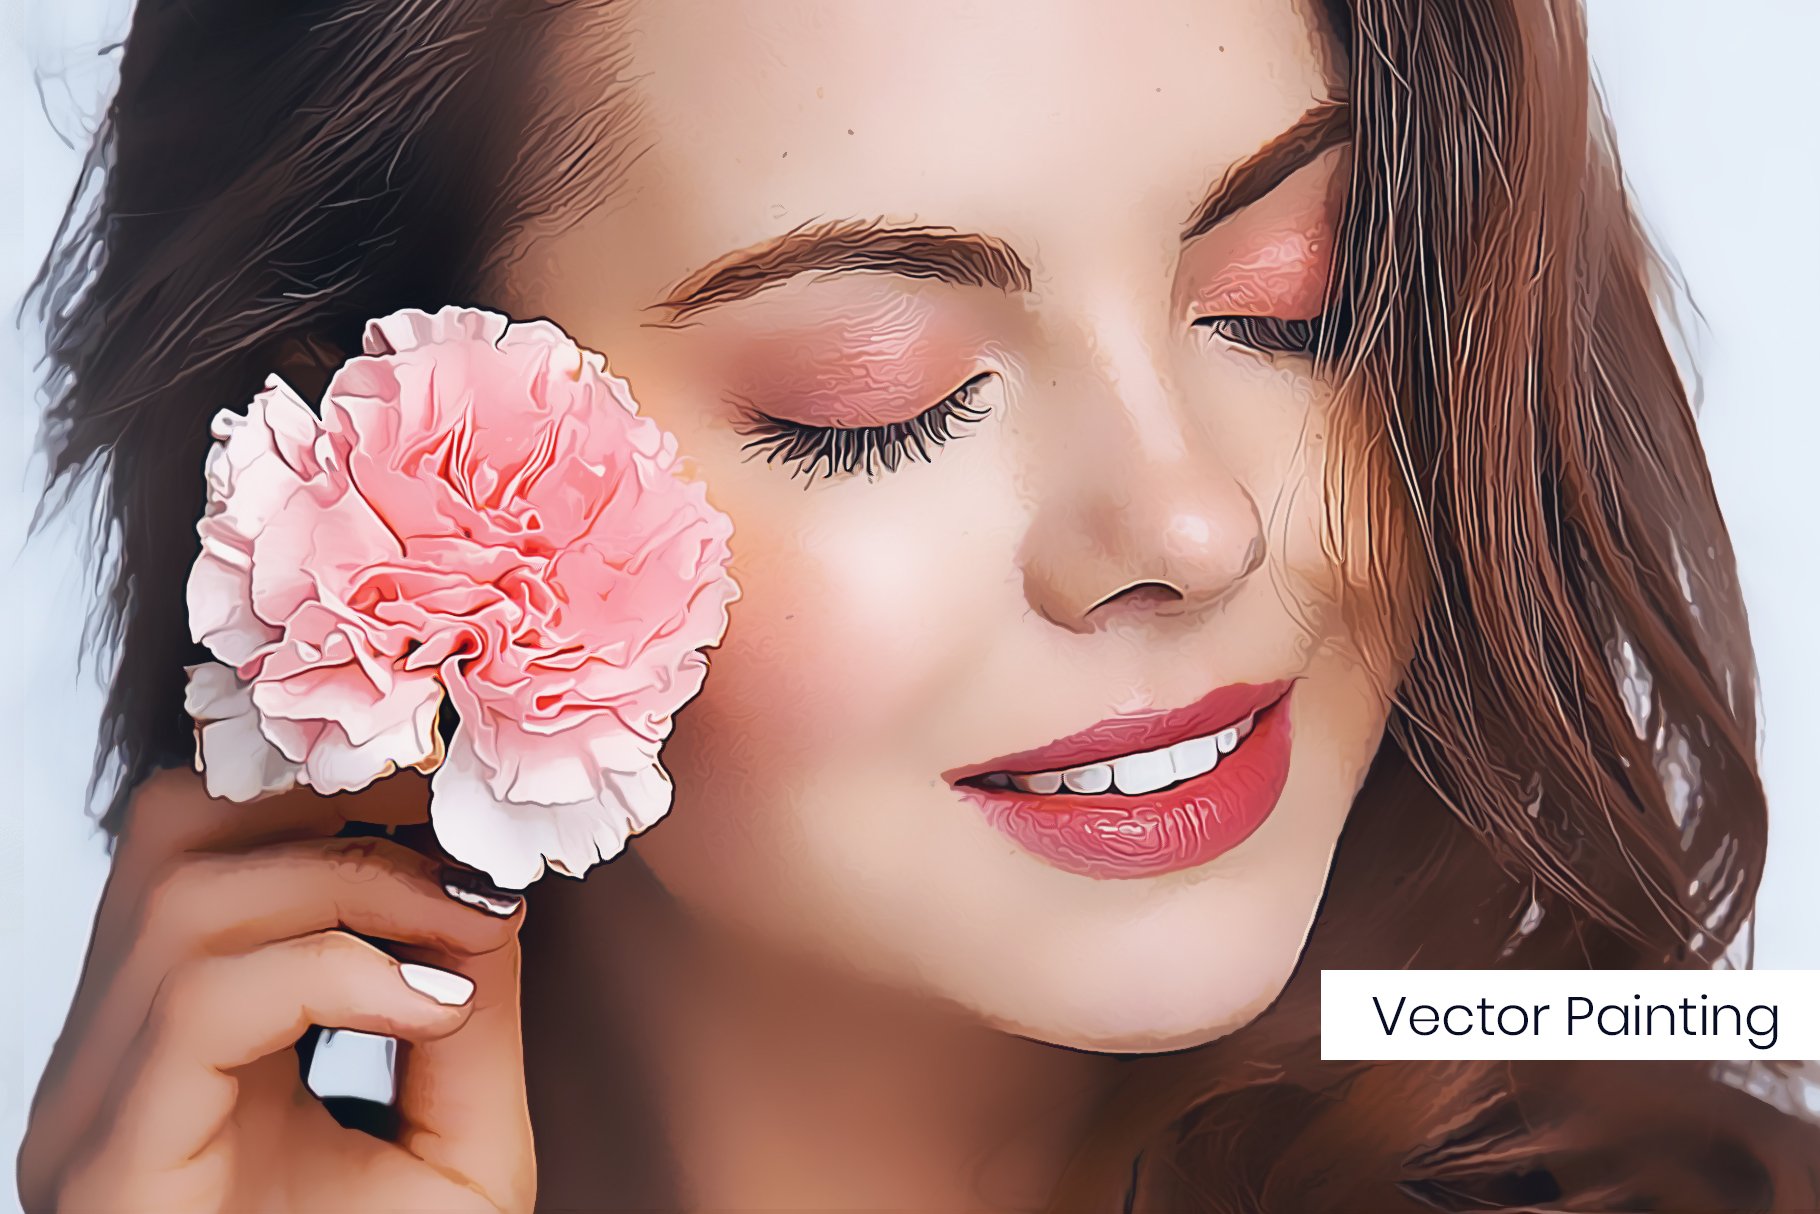 Vector Painting PS Actionspreview image.